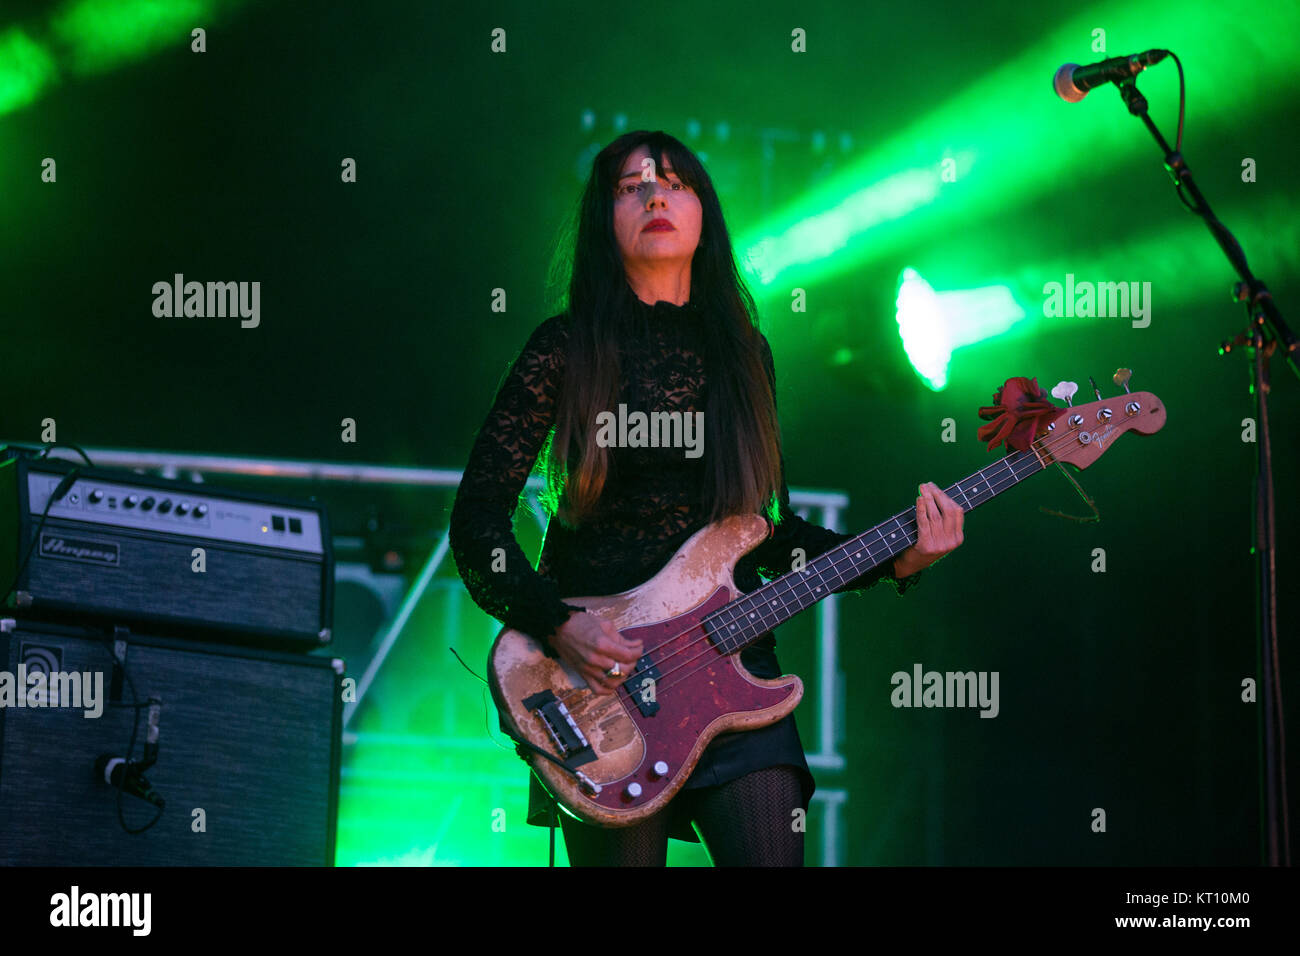 Norway, Oslo – August 11, 2017. The American rock band Pixies performs a live concert concert during the Norwegian music festival Øyafestivalen 2017 in Oslo. Here bass player Paz Lenchantin is seen live on stage. Stock Photo